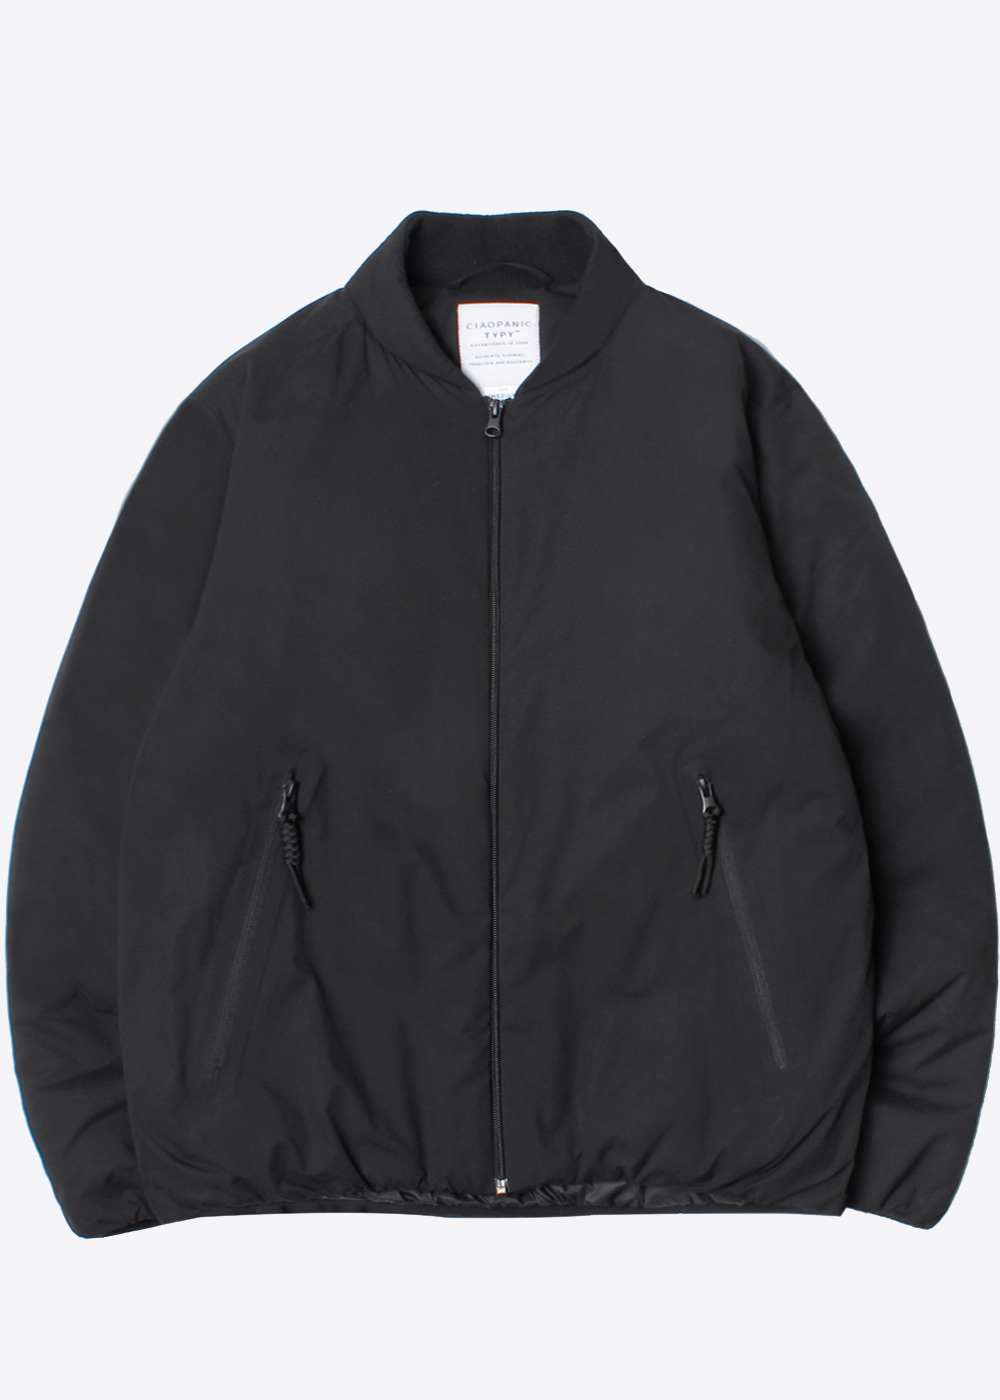 CIAOPANIC TYPY’over fit’nylon down parka